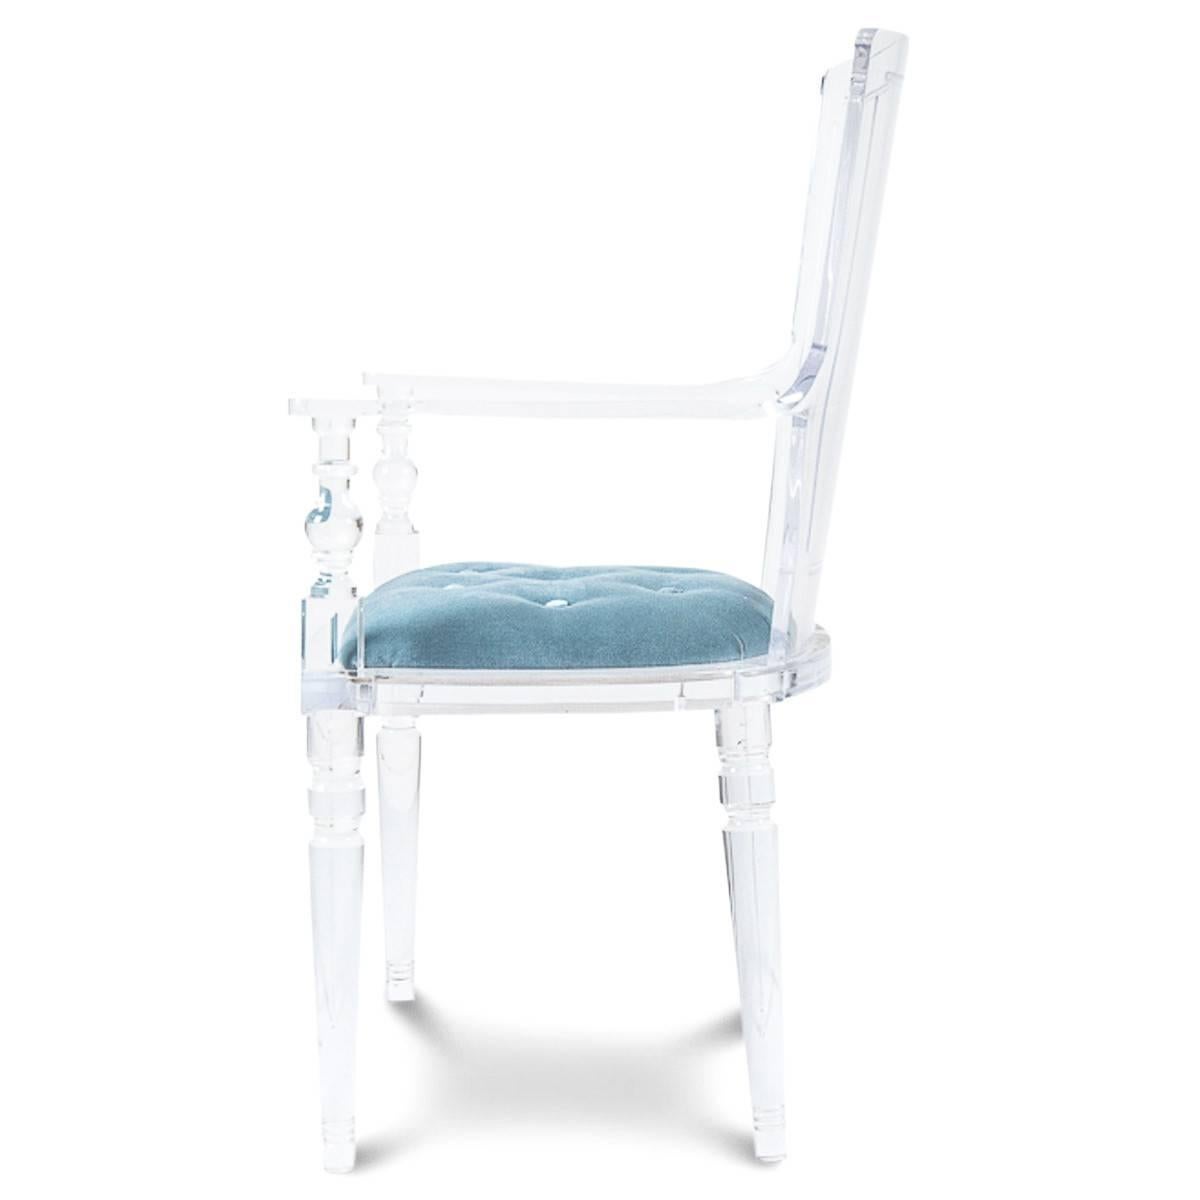 Perfect companion to your set of Lucite / acrylic furniture pieces. These Lucite armchairs is built with Velvet seats that gives its luxurious look.

Dimensions:

23.5